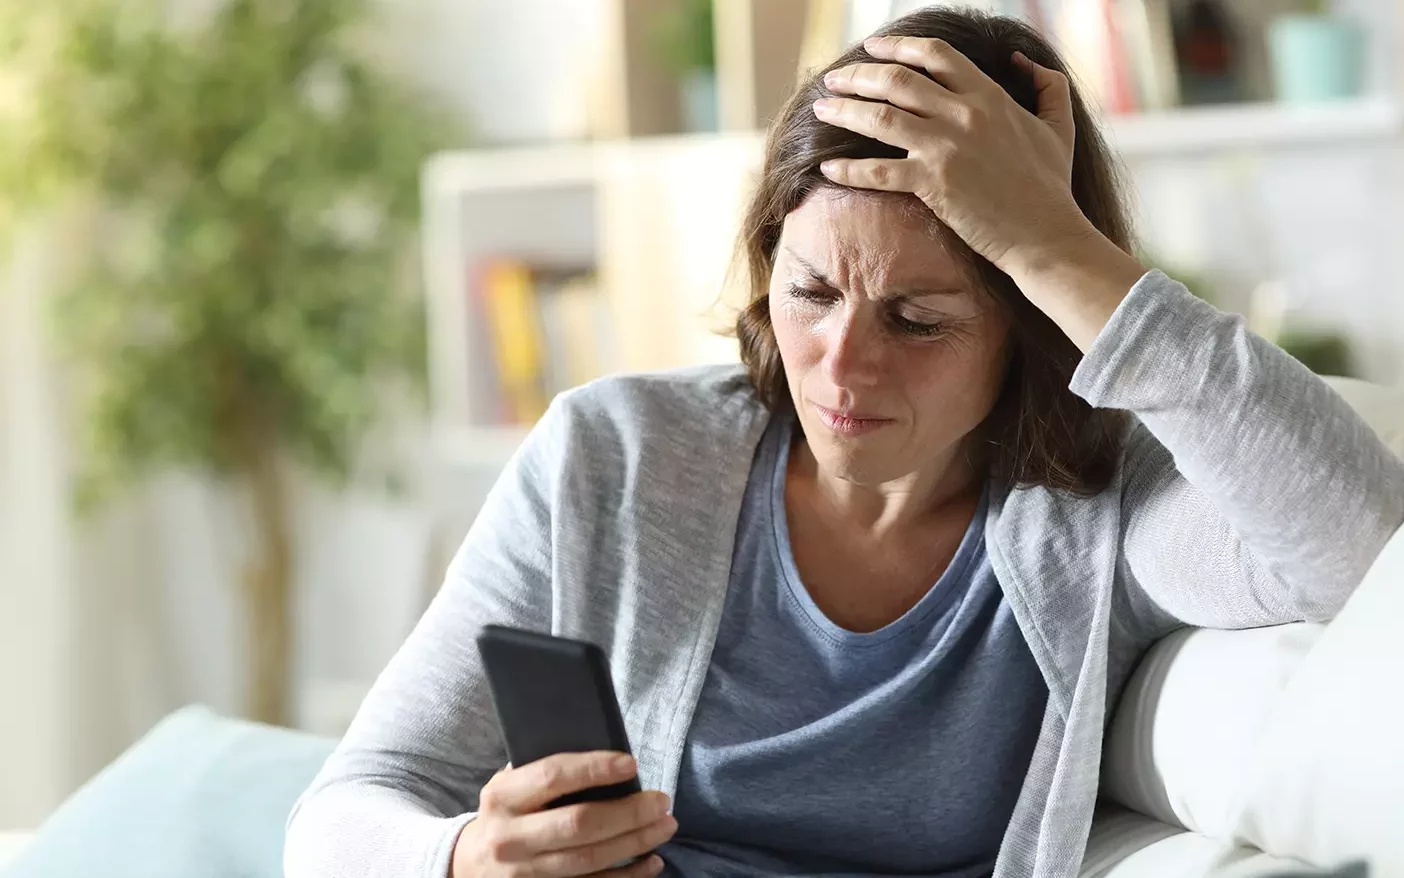 A distressed woman looks down at a cell phone.